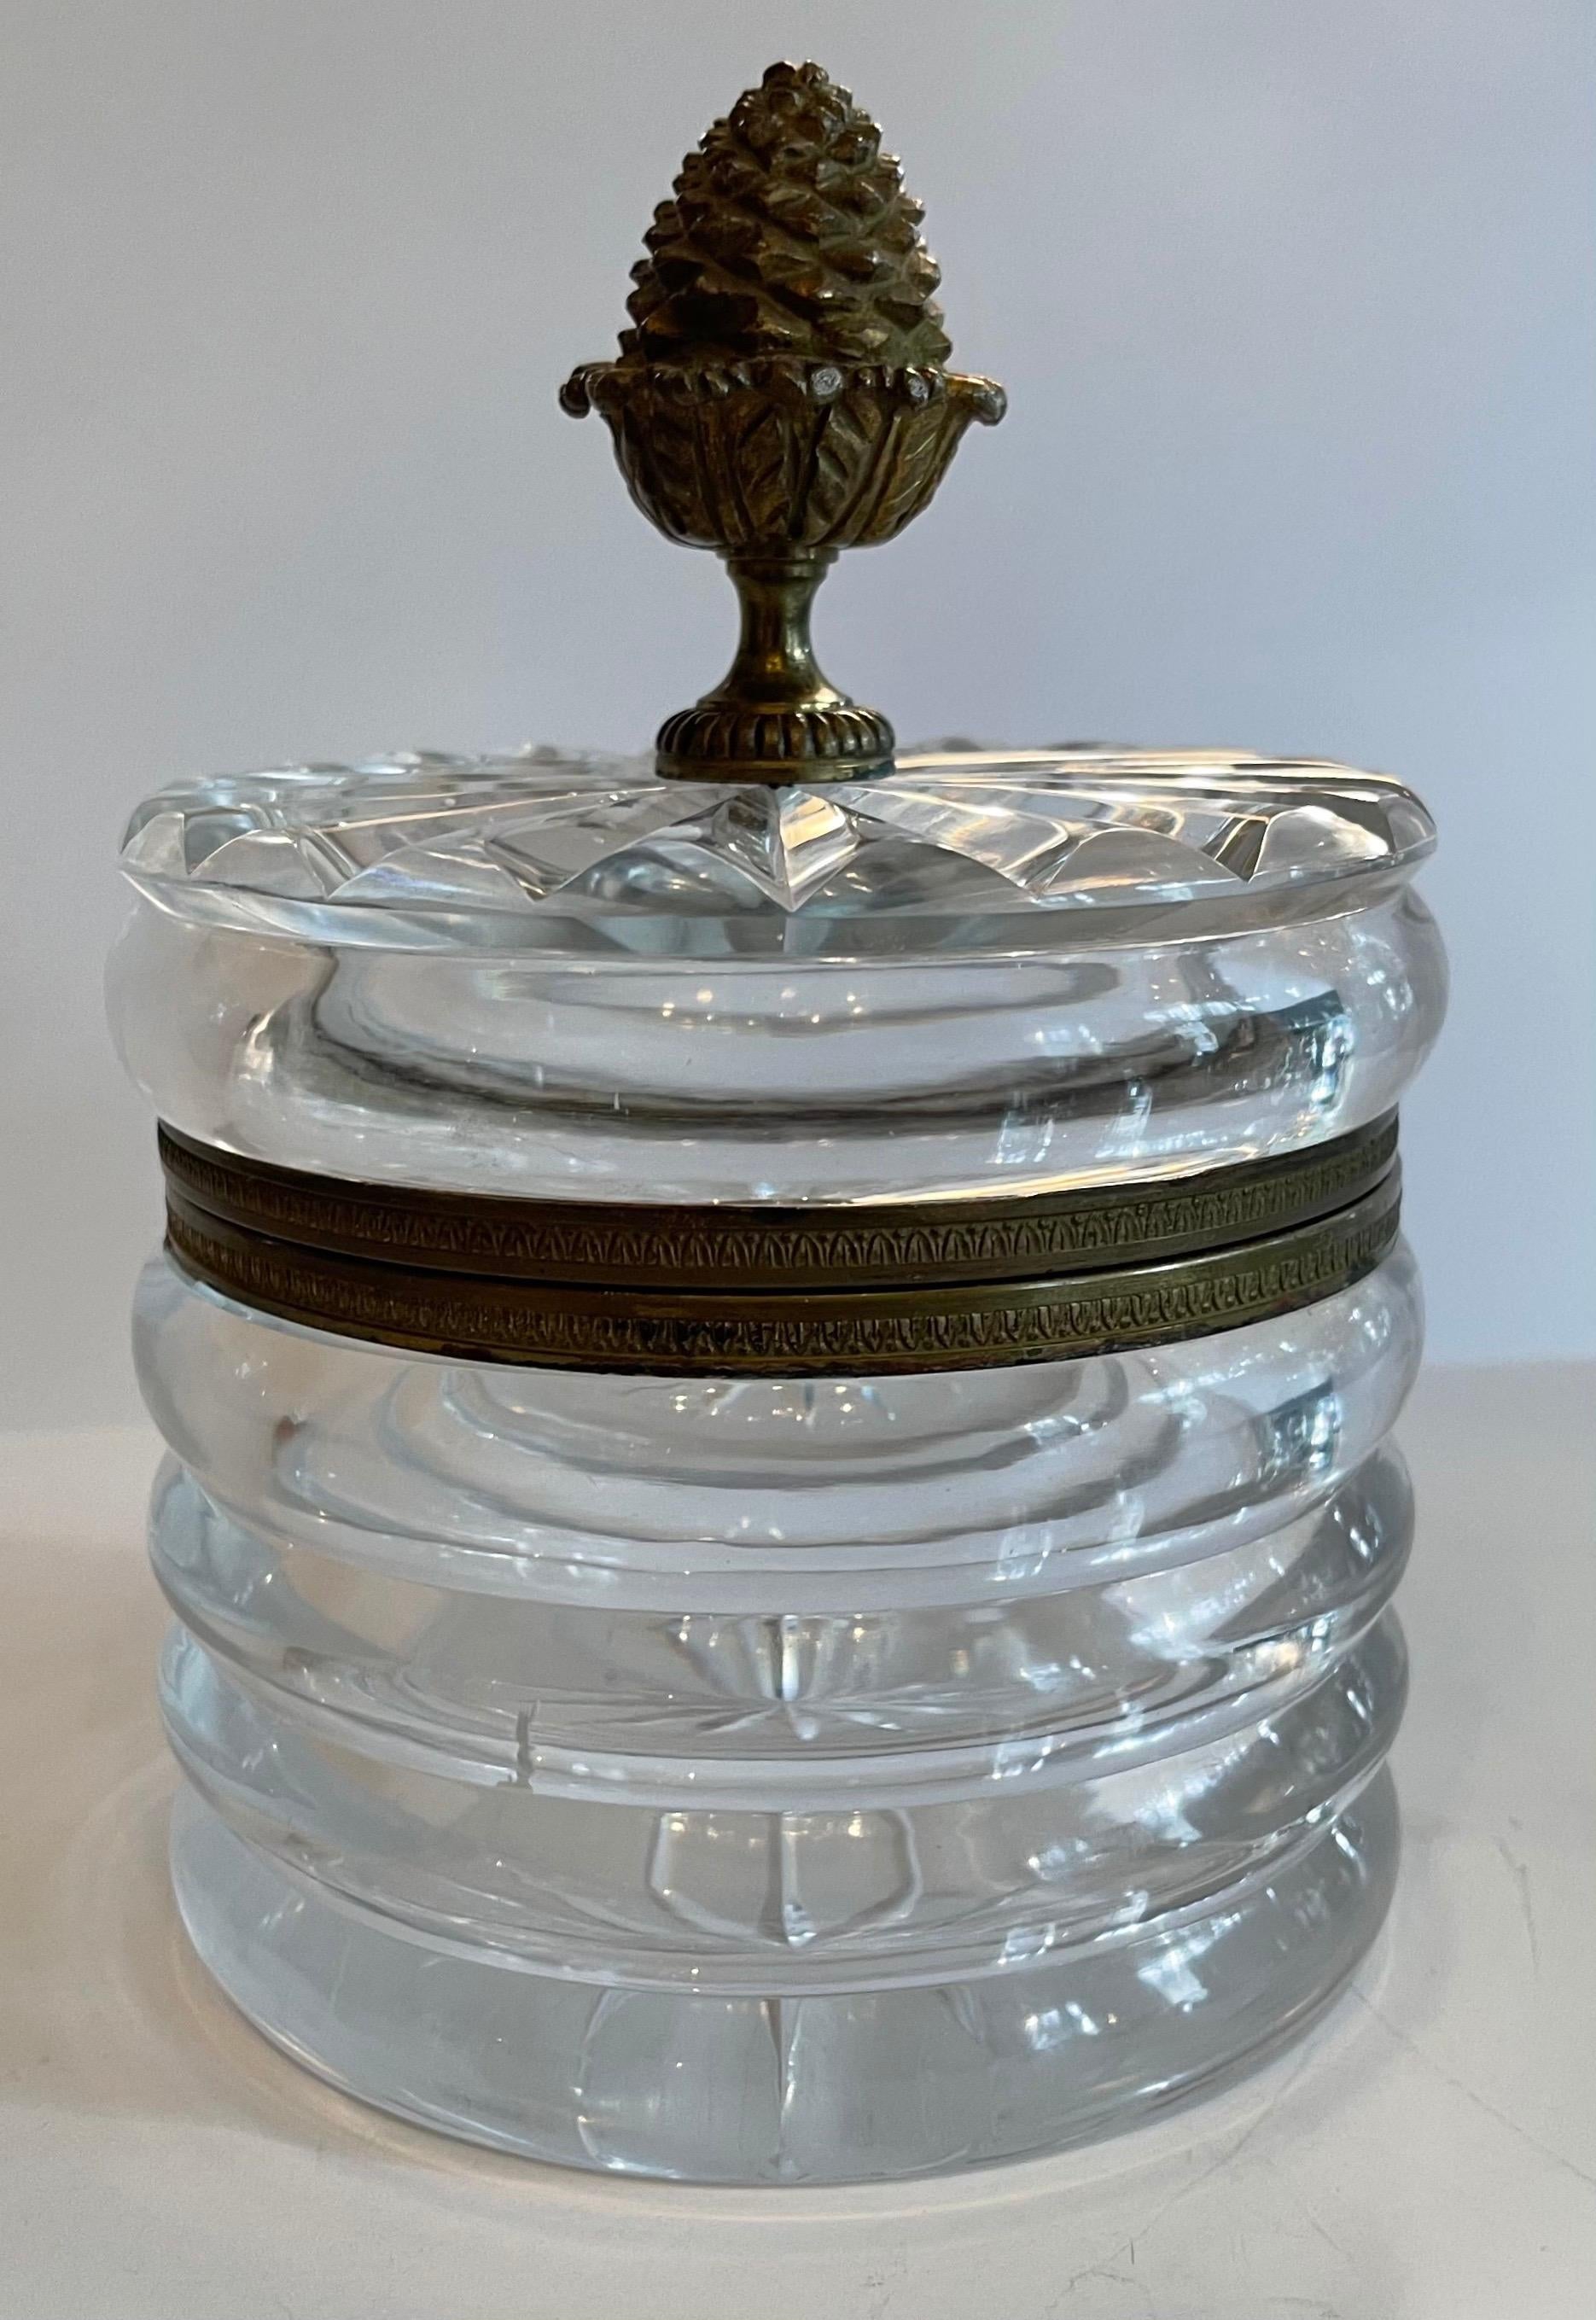 A wonderful round Baccarat style doré bronze and cut crystal casket jewelry box with acorn finial handle and hinged top.

Measures: 5